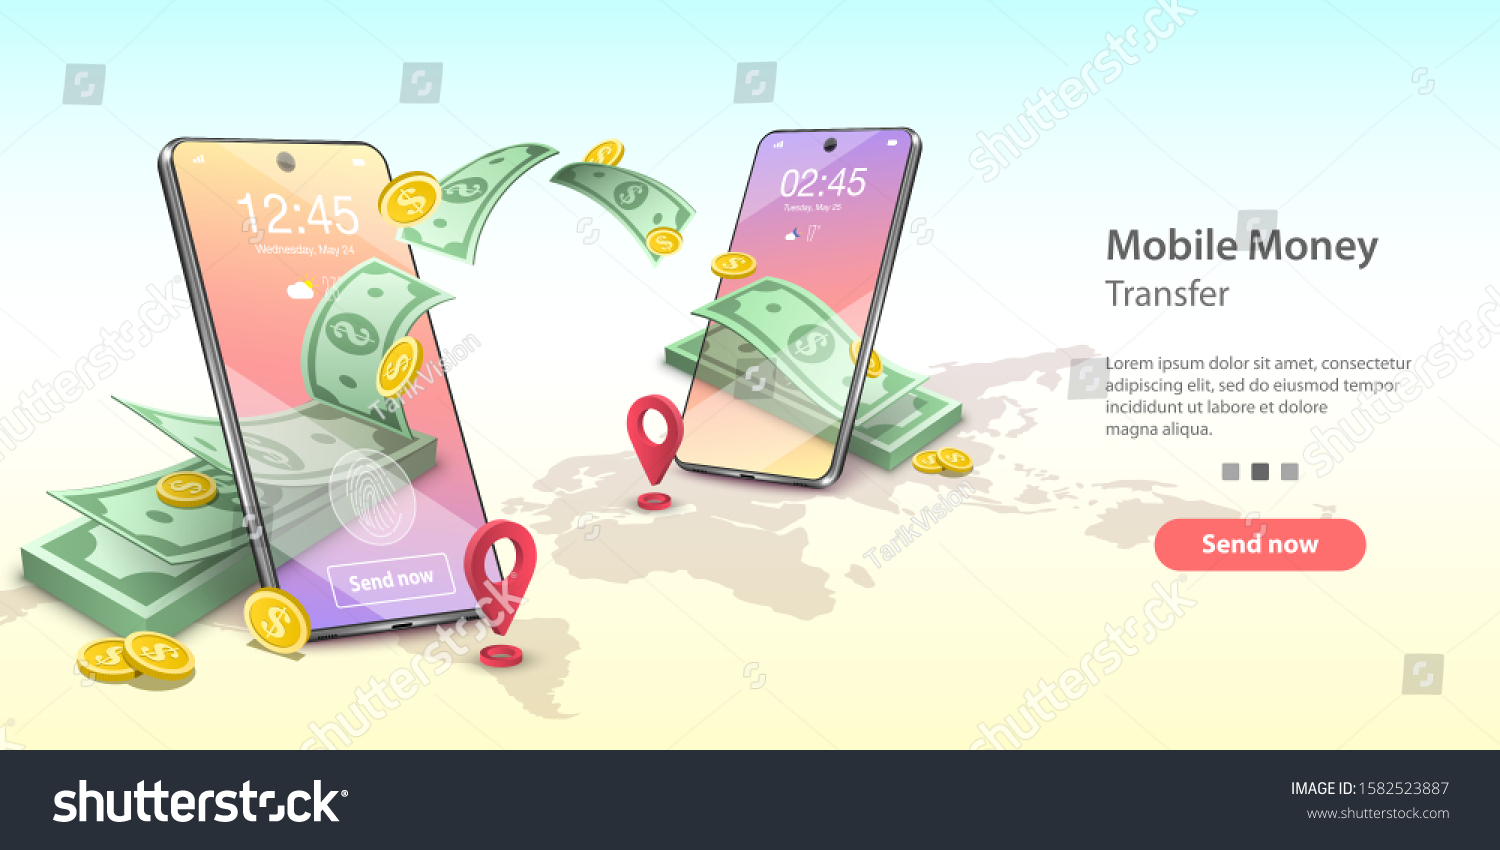 SVG of Vector concept illustration of mobile money transfer. Two smartphones and bundle of the banknotes and coins are flying from one smartphone to the other. Template for website landing page. svg